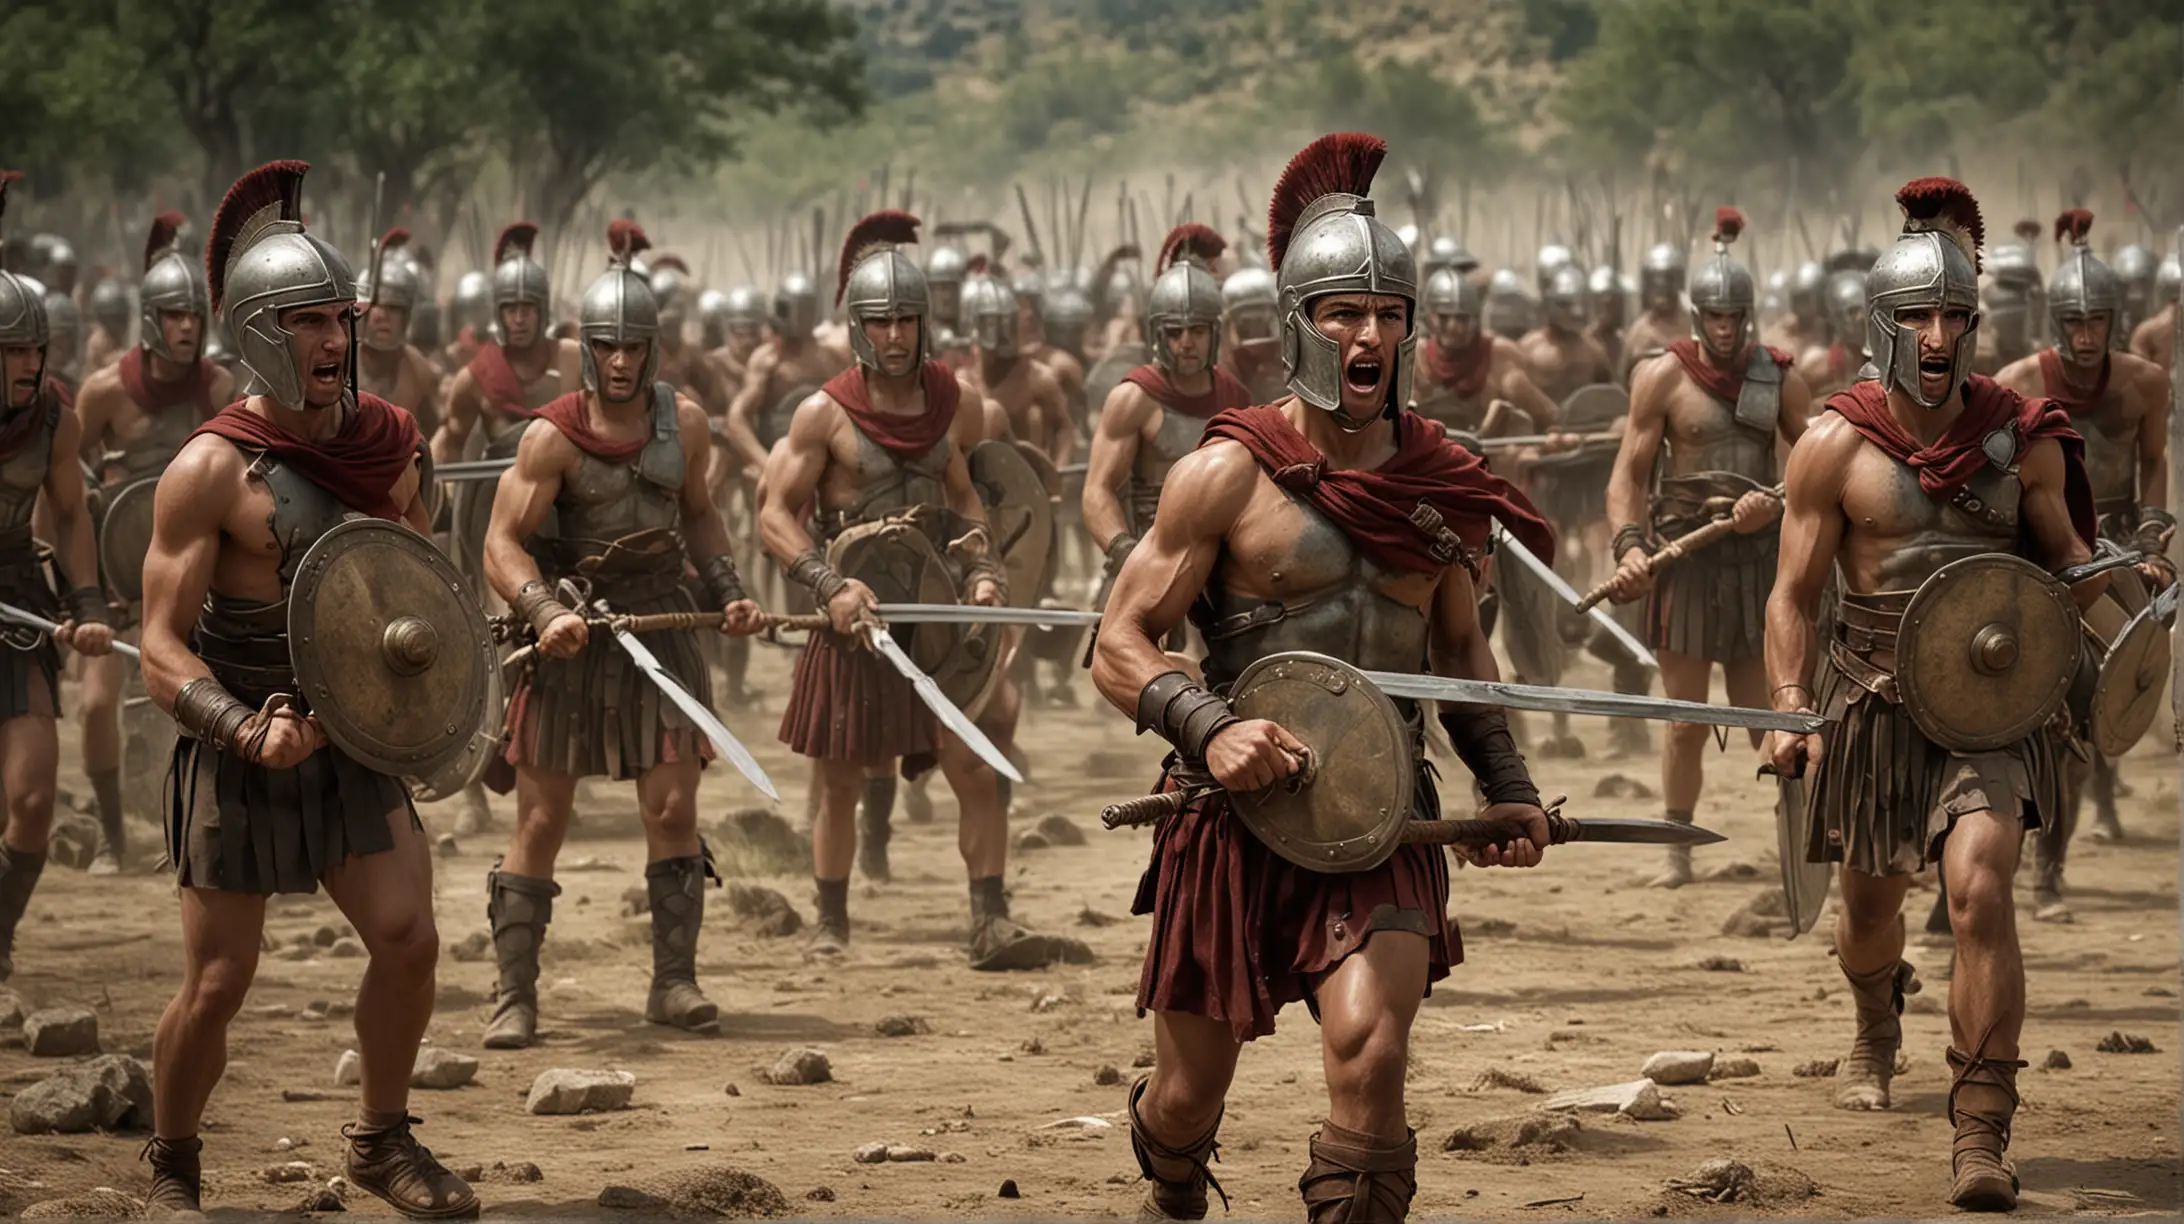 General Visualization Prompt: Visualize a scene depicting the Spartans training for battle, showcasing their discipline, strength, and skill as warriors. The scene should capture the intensity and rigor of Spartan military training, highlighting the physical and mental fortitude required to become a member of the elite warrior class.

Detailed Image Description: Generate an image set in the Spartan agoge, where young warriors undergo rigorous training to prepare for battle. In the foreground, a group of young Spartans is shown engaged in various training exercises, including swordsmanship drills, wrestling matches, and endurance tests. Their instructors, clad in traditional Spartan attire, oversee the training with a watchful eye, ensuring that the warriors-in-training are pushed to their limits and beyond. Despite the grueling nature of the training, the young Spartans display unwavering determination and resilience, their faces set in expressions of fierce concentration and focus. The image conveys the disciplined and Spartan way of life, emphasizing the importance of physical and mental strength in the pursuit of excellence on the battlefield.
